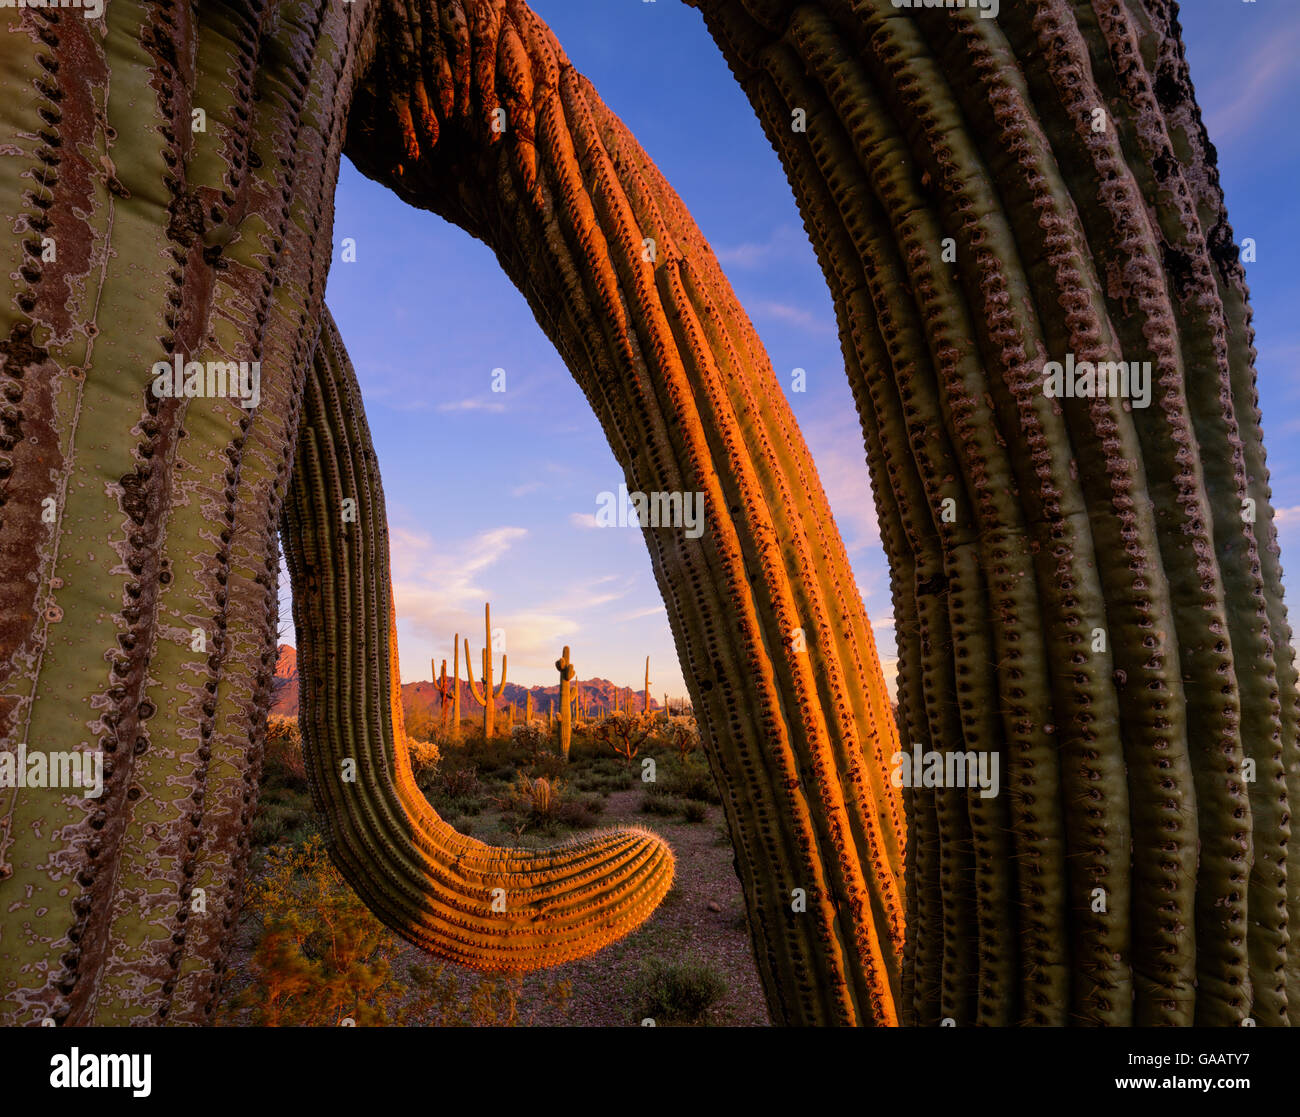 Saguaro cactus (Carnegiea gigantea) with twisted arms at sunset, with Ajo Mountains in the background, Arizona, USA. Stock Photo